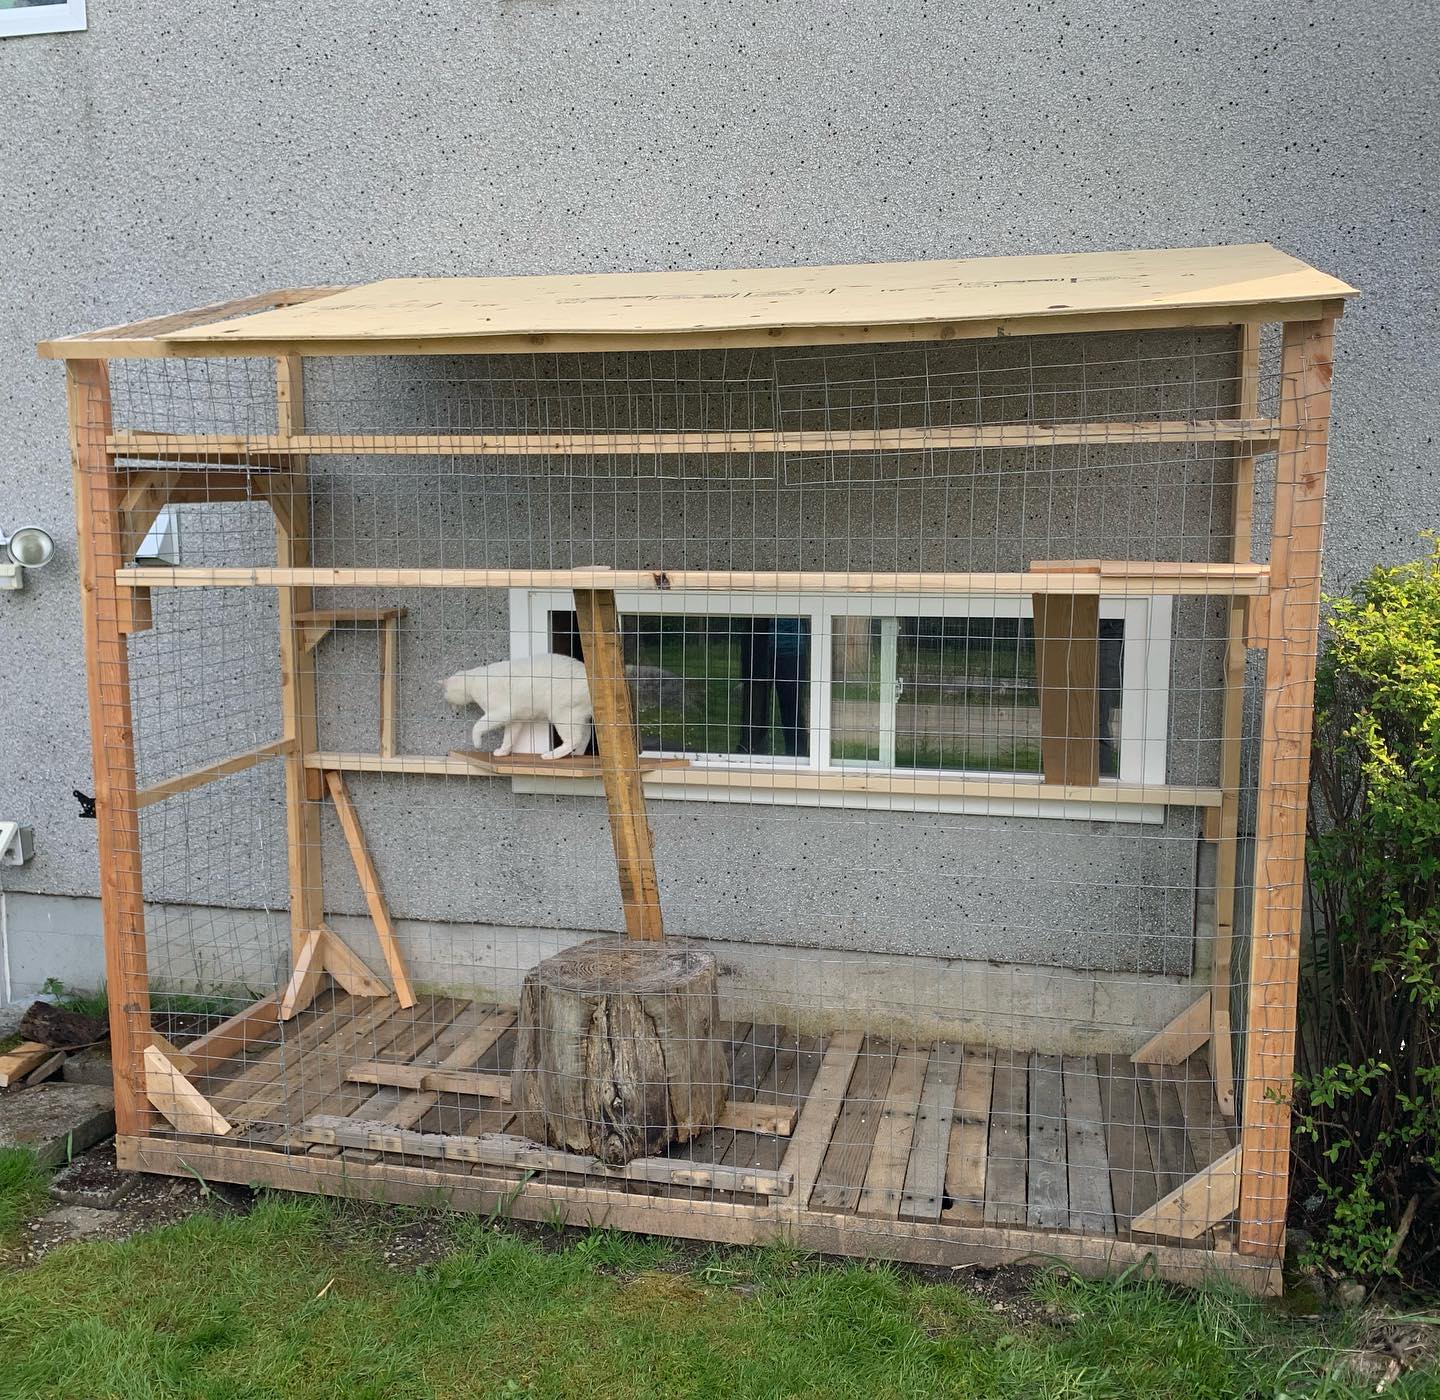 The catio is complete enough that @jon.snow.the.cat.yyj is able to use it. Hard to see in this pic, but there are a few cat walks, ramps, perches, a ladder like thing, and a rotting log for scratching. #catio #catsofinstagram #catsofig #jonthecat #jonsnowthecat